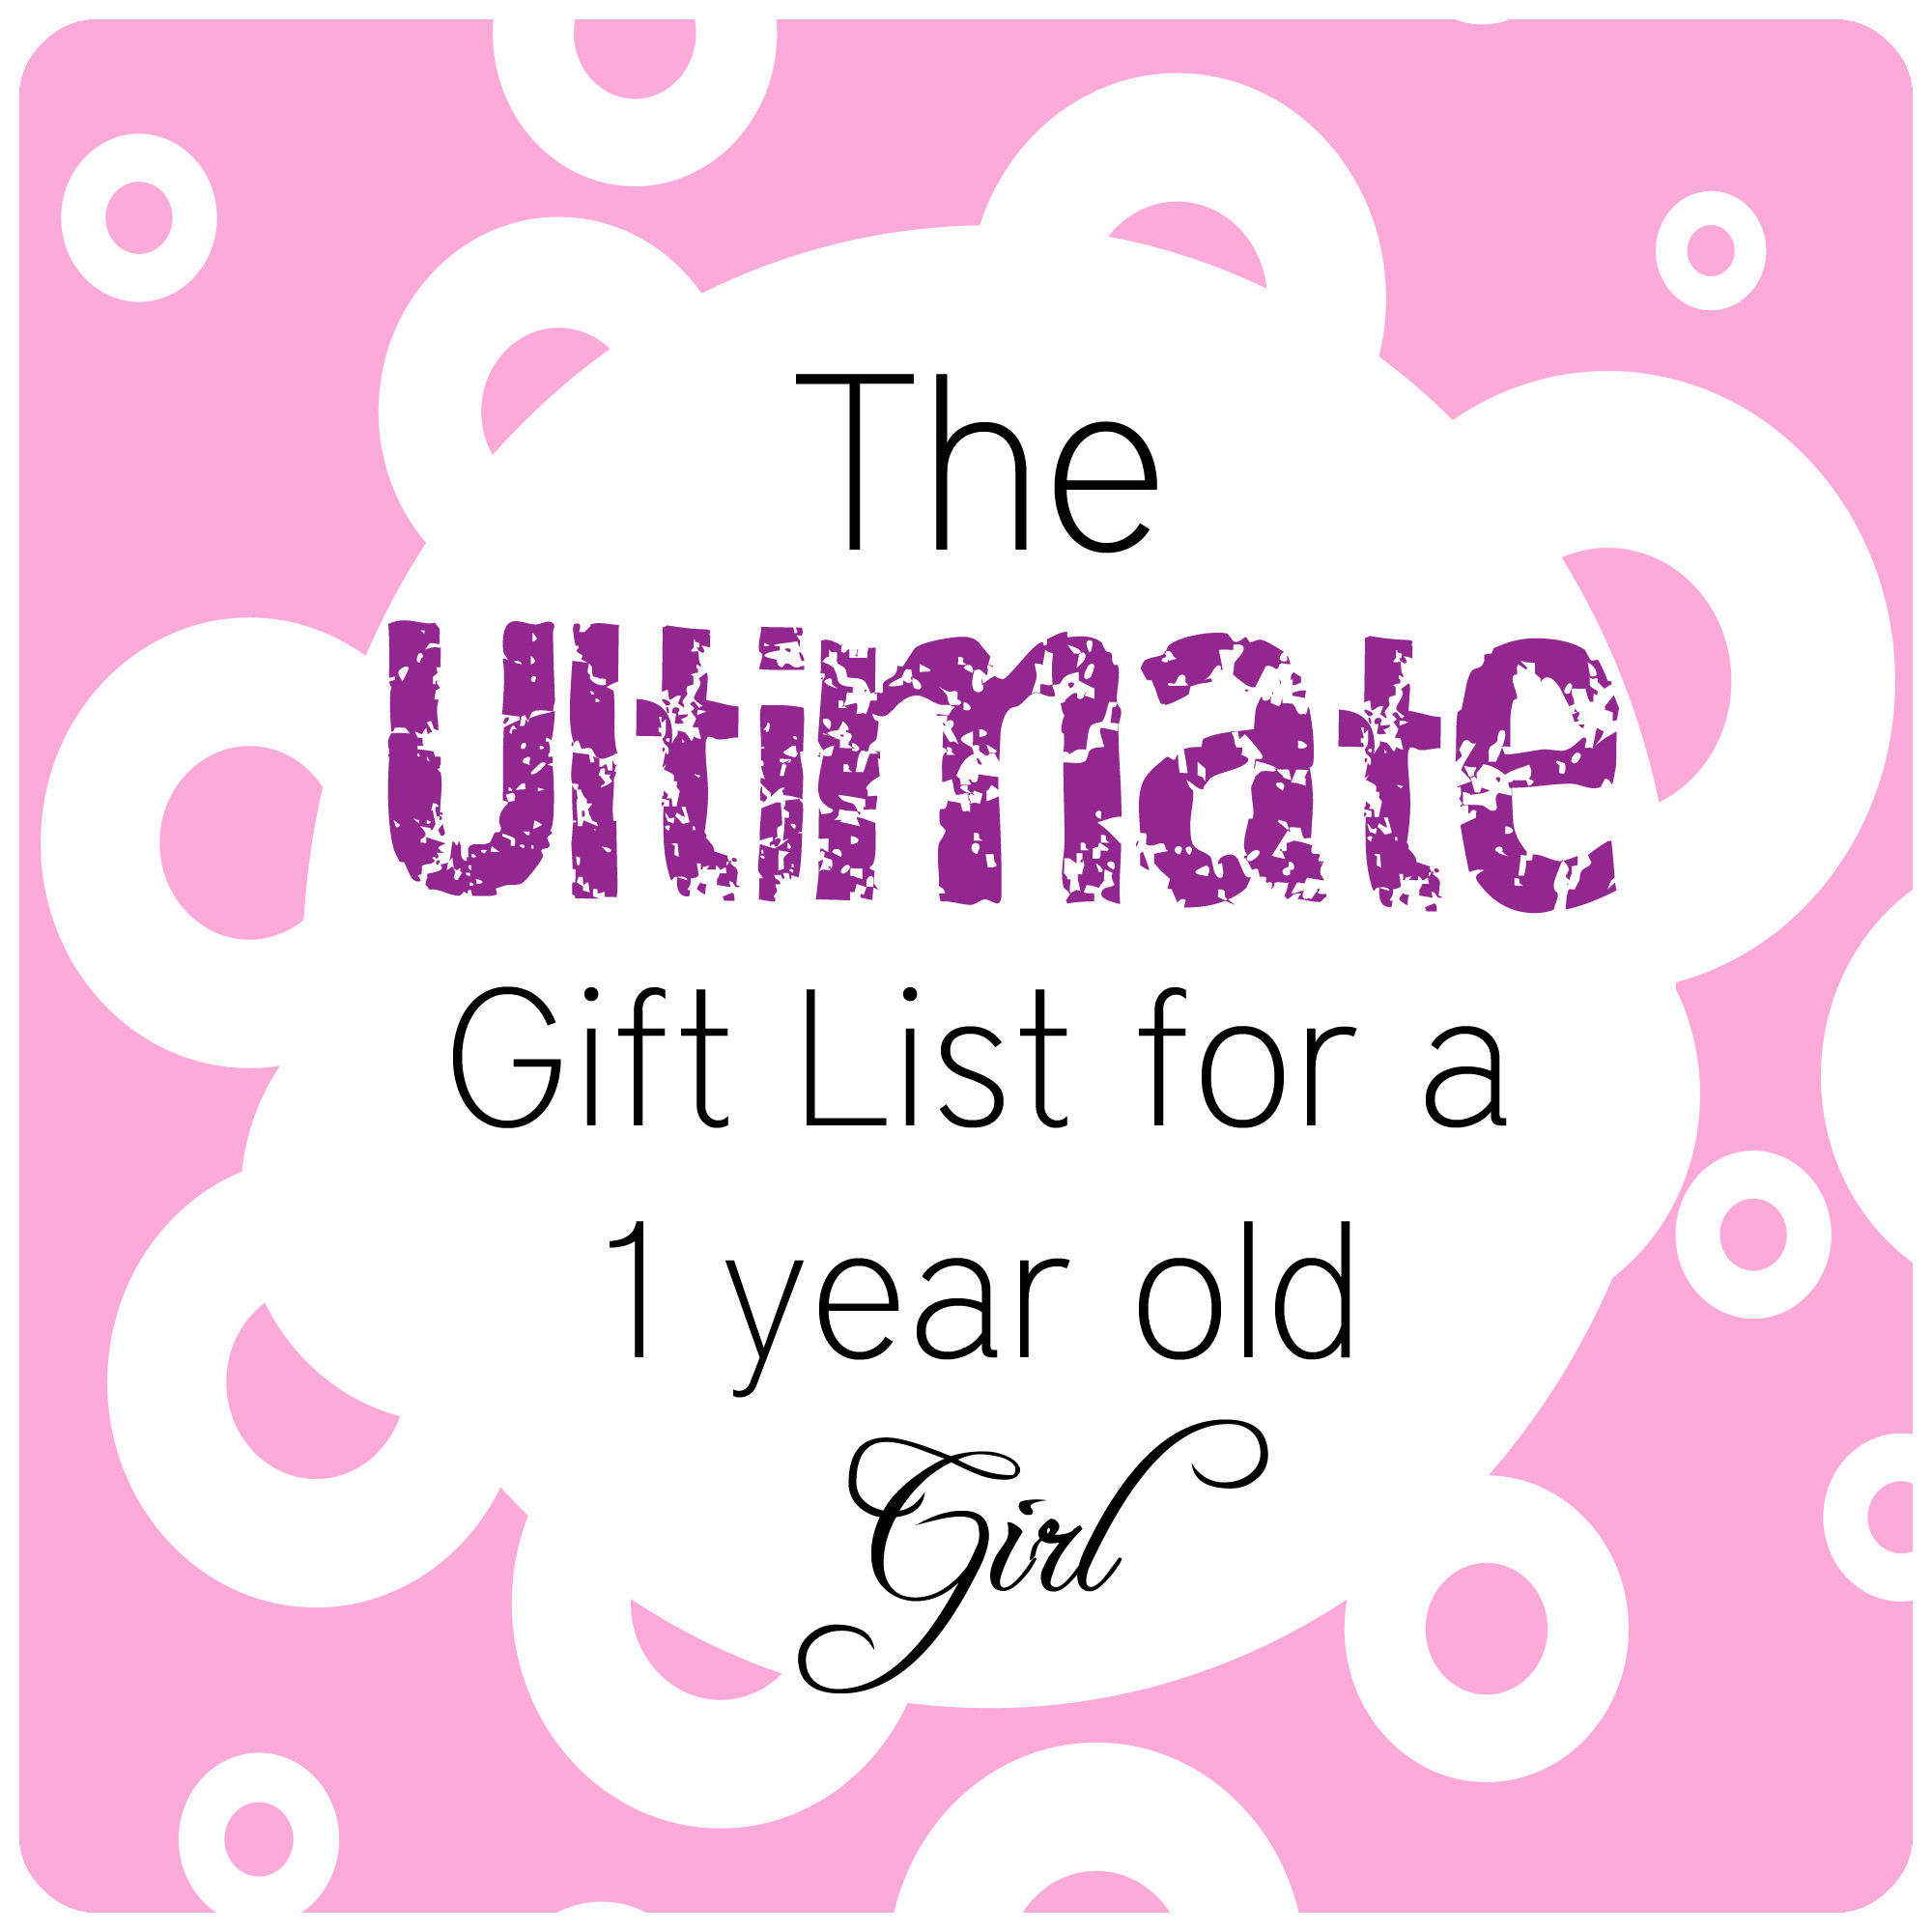 Gift Ideas For 1 Year Baby Girl
 The Ultimate Gift List for a 1 Year Old Girl by